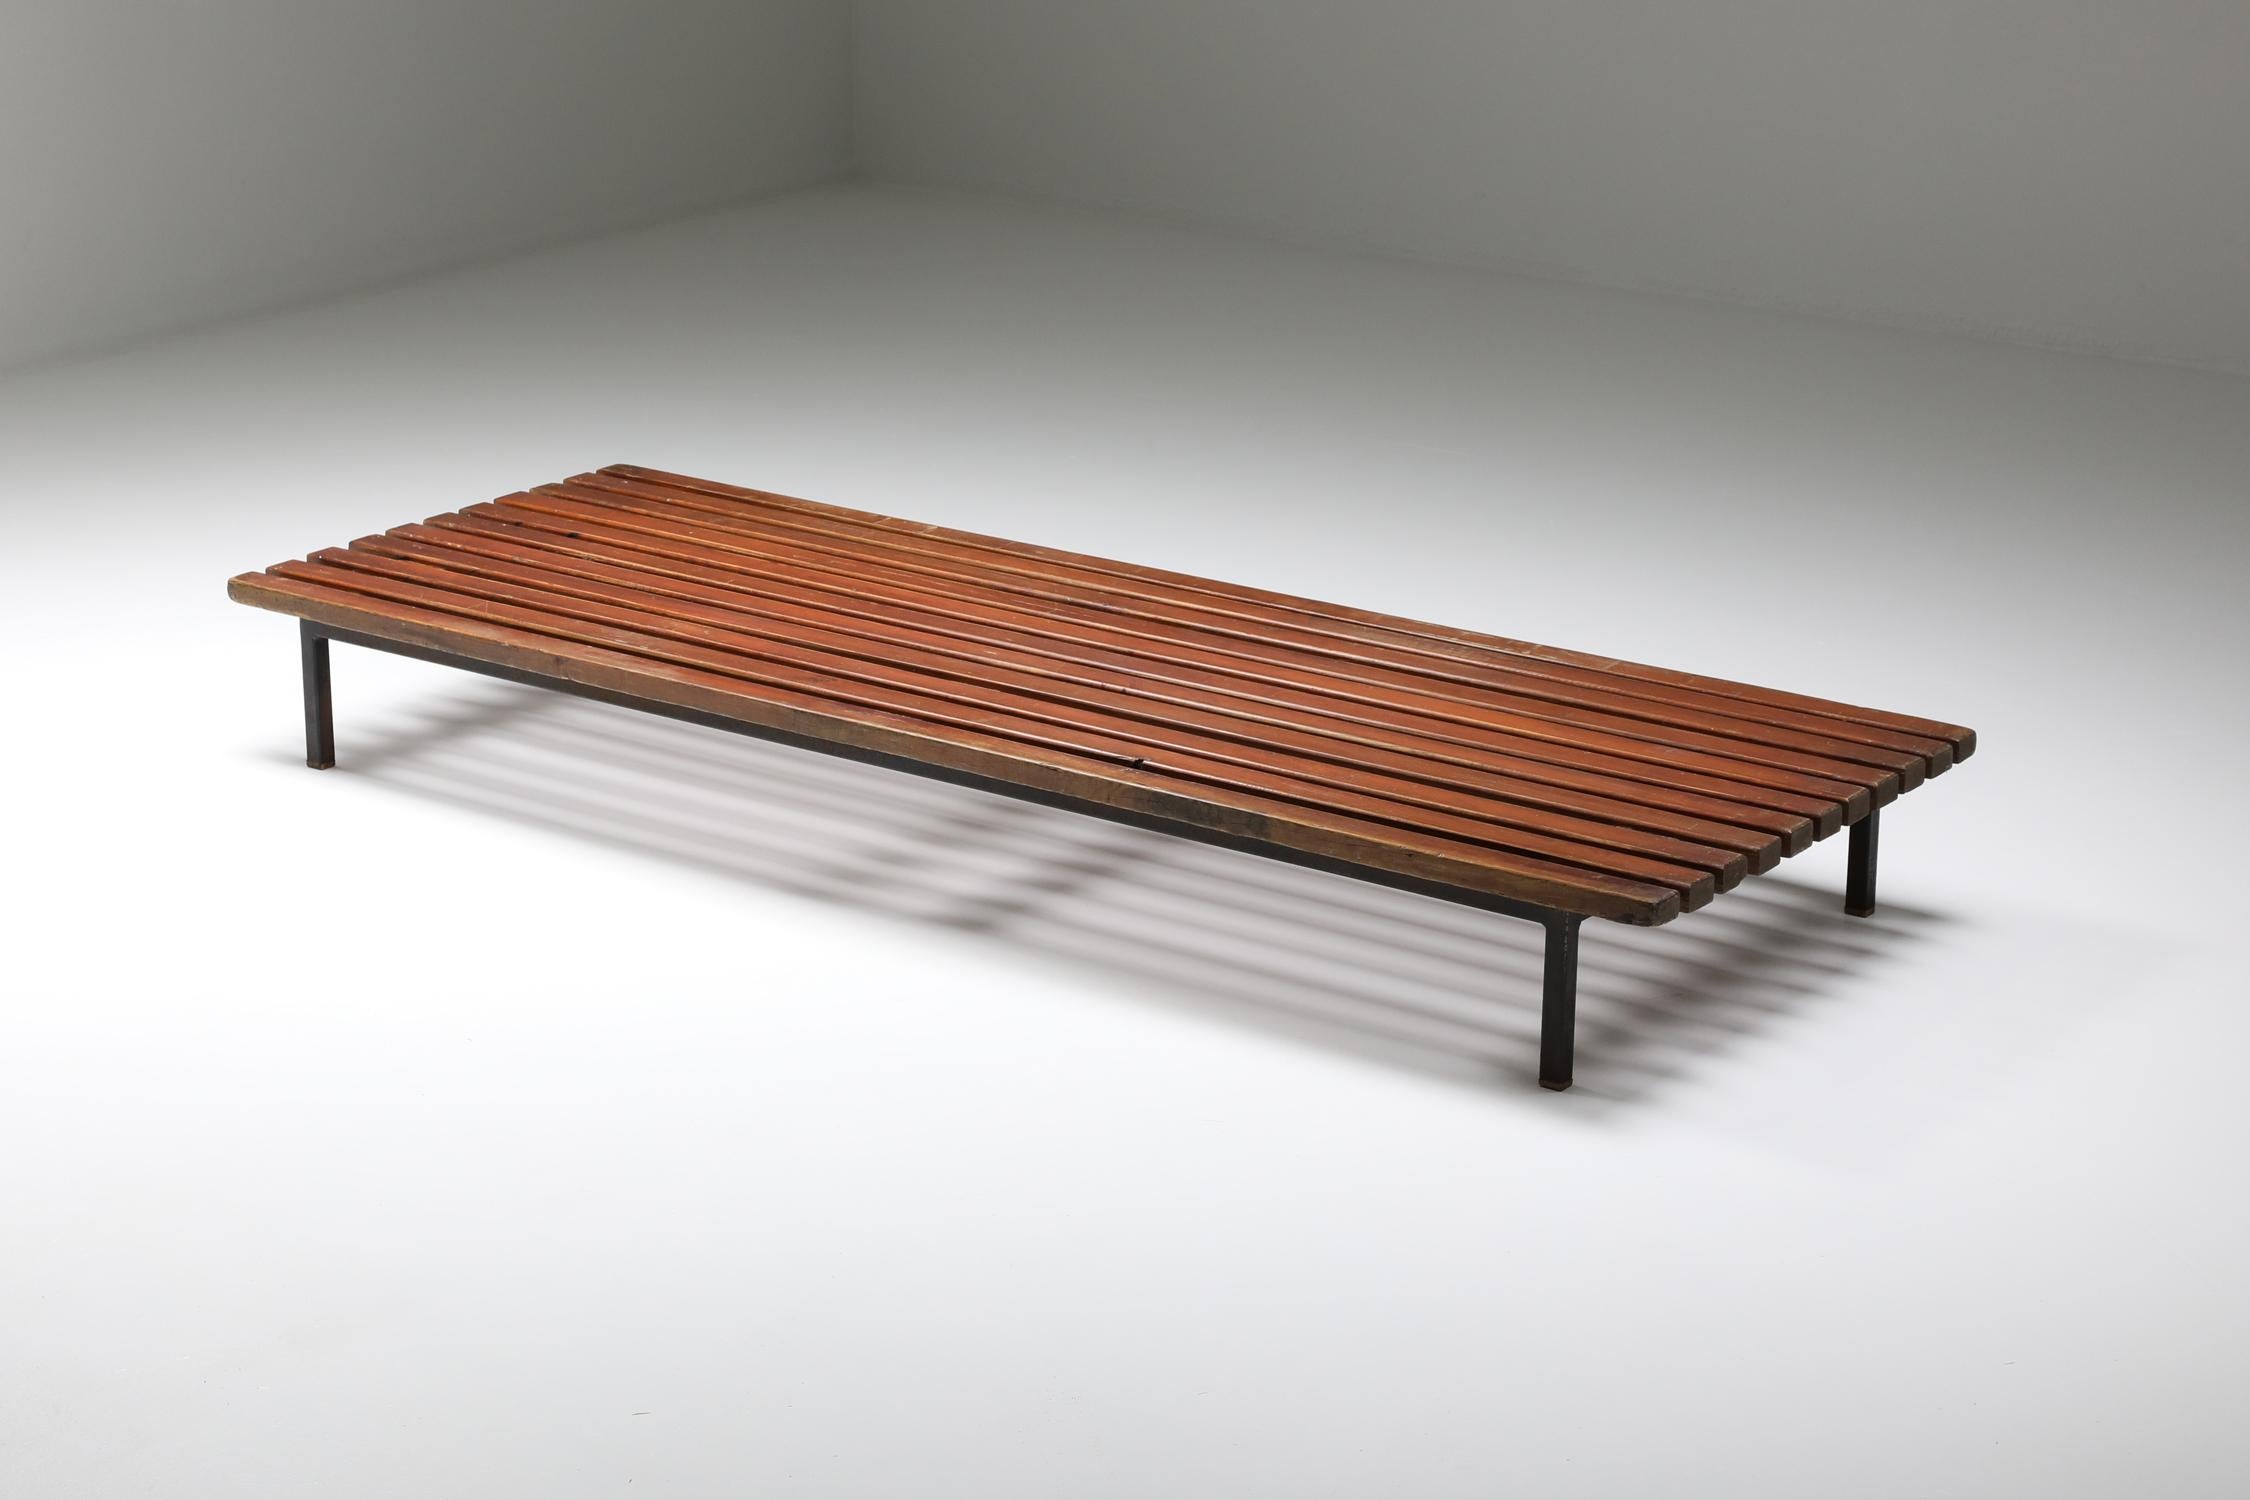 Charlotte Perriand, Low bench, from Cité Cansado, Mauritania, circa 1958
Stained pine, painted steel.

Metal produced by Métal Meubles and wood produced by Négroni, France. Issued by Galerie Steph Simon, Paris, France.

Trailblazer Charlotte